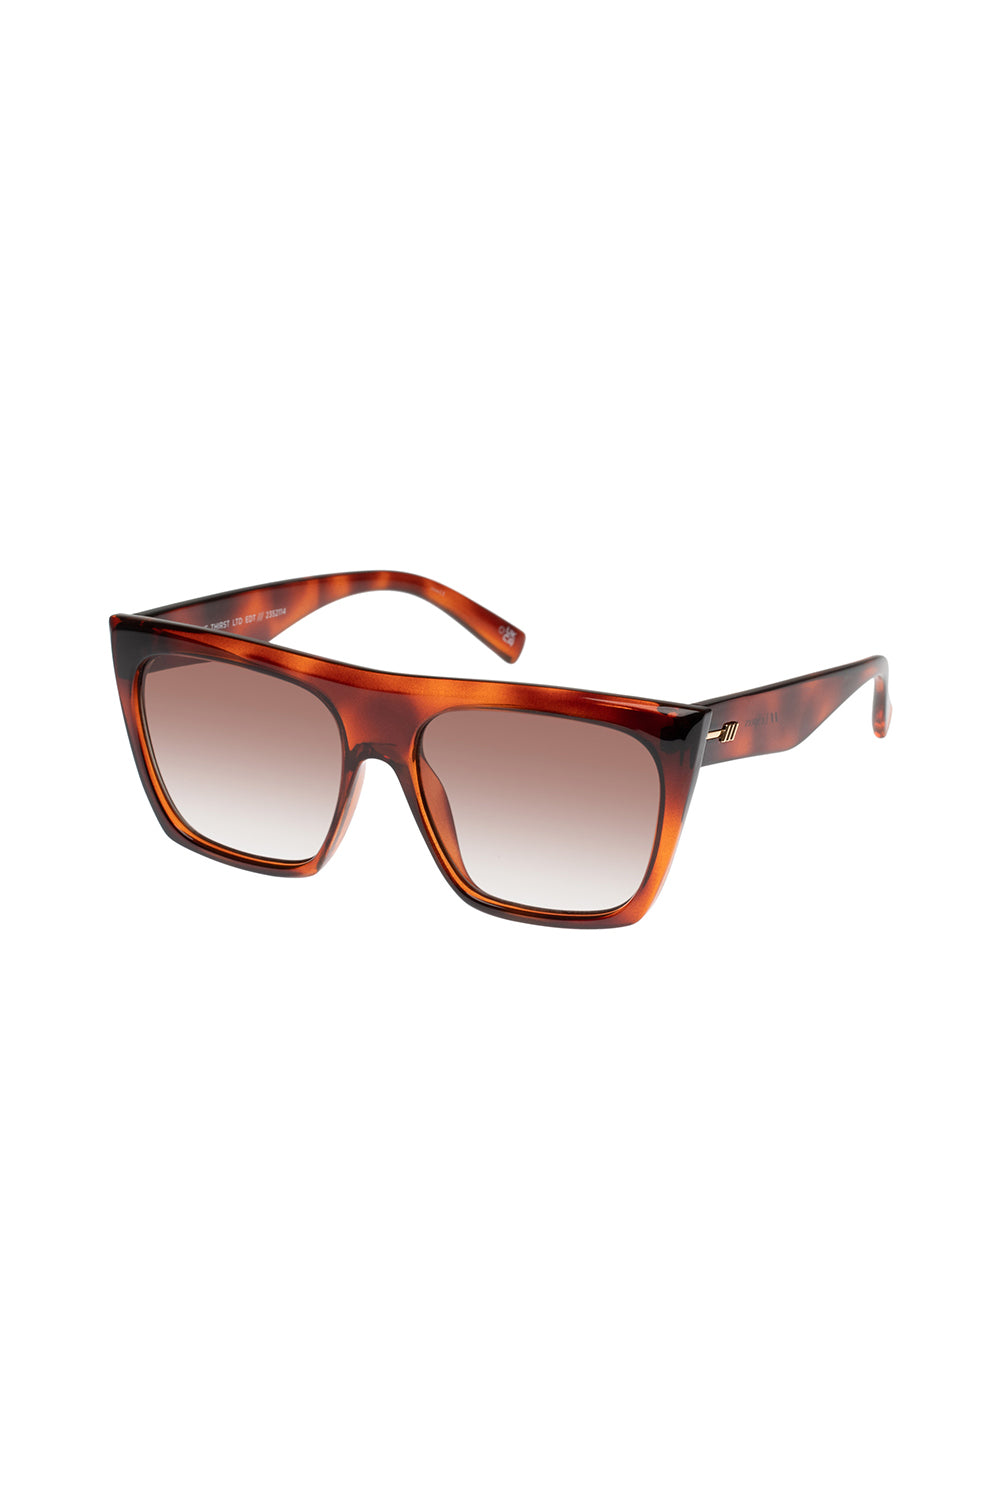 The Thirst Sunglasses - Toffee Tort